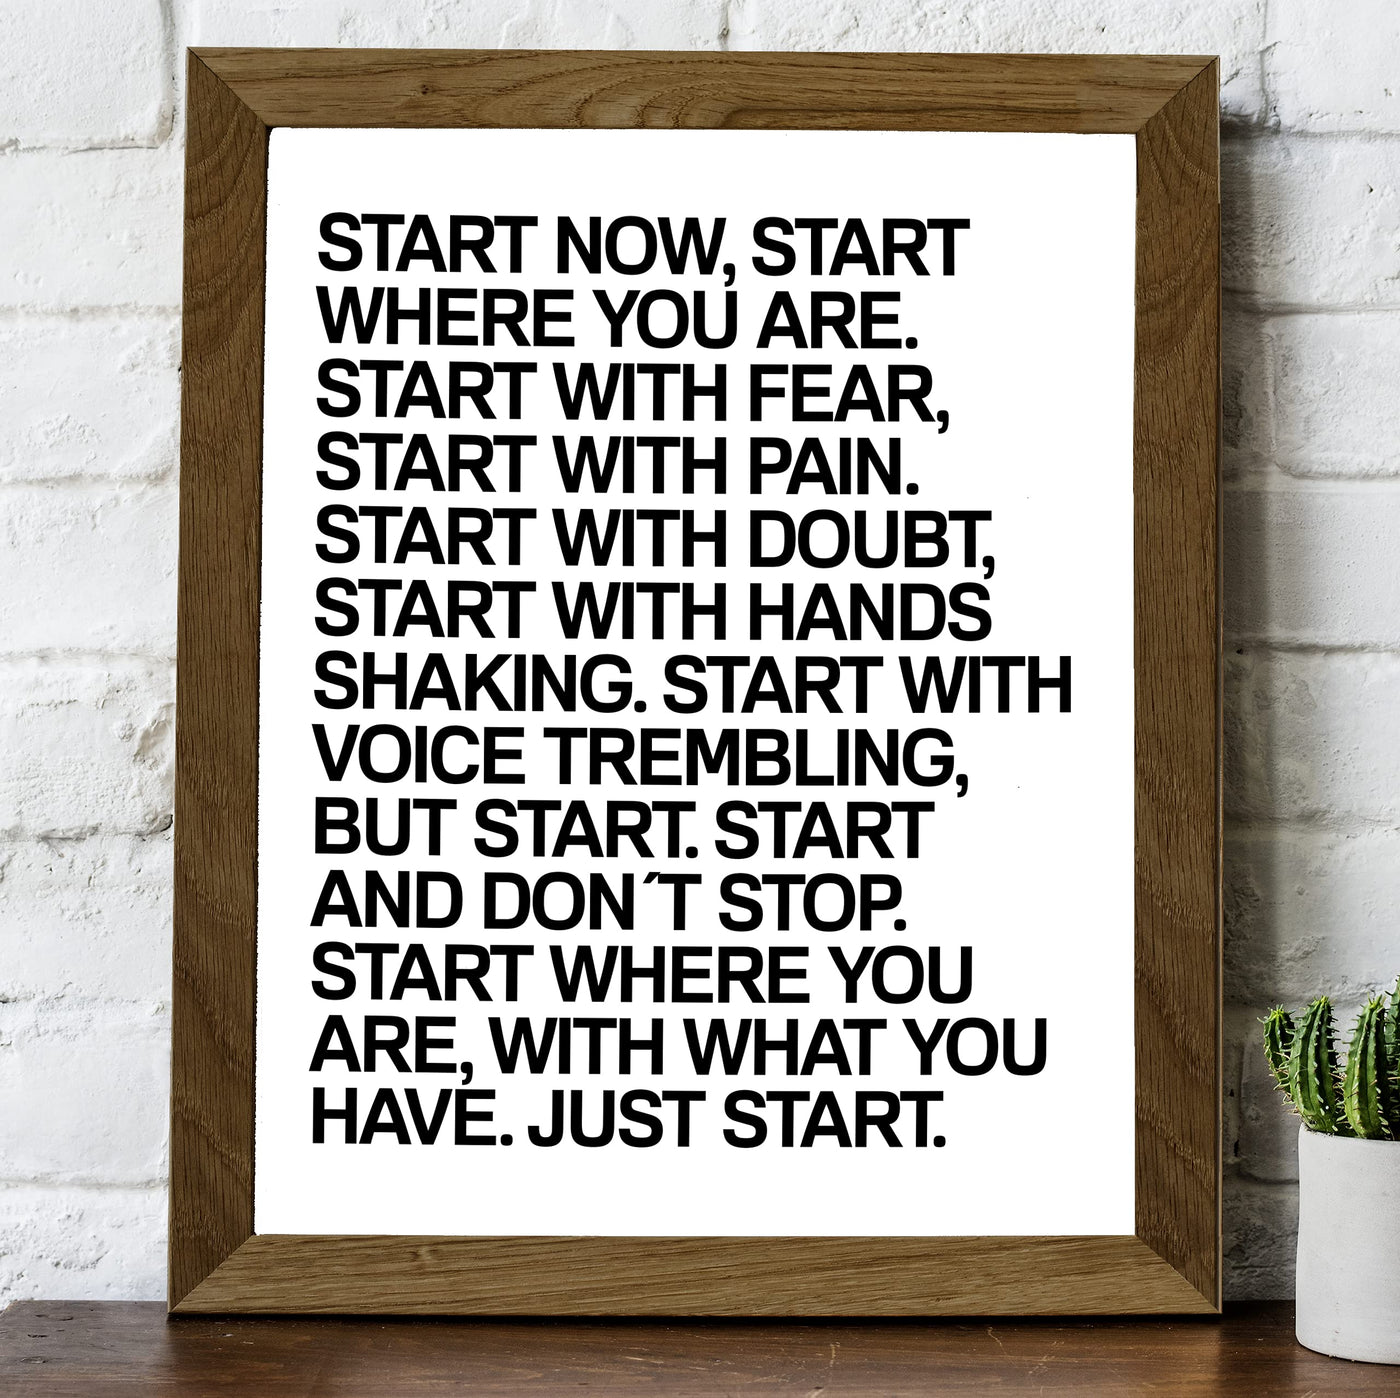 Start Now & Don't Stop Motivational Quotes Wall Decor-8 x 10" Inspirational Art Print-Ready to Frame. Modern Typographic Design. Perfect Home-Office-Desk-School-Gym Decor! Great Gift of Motivation!